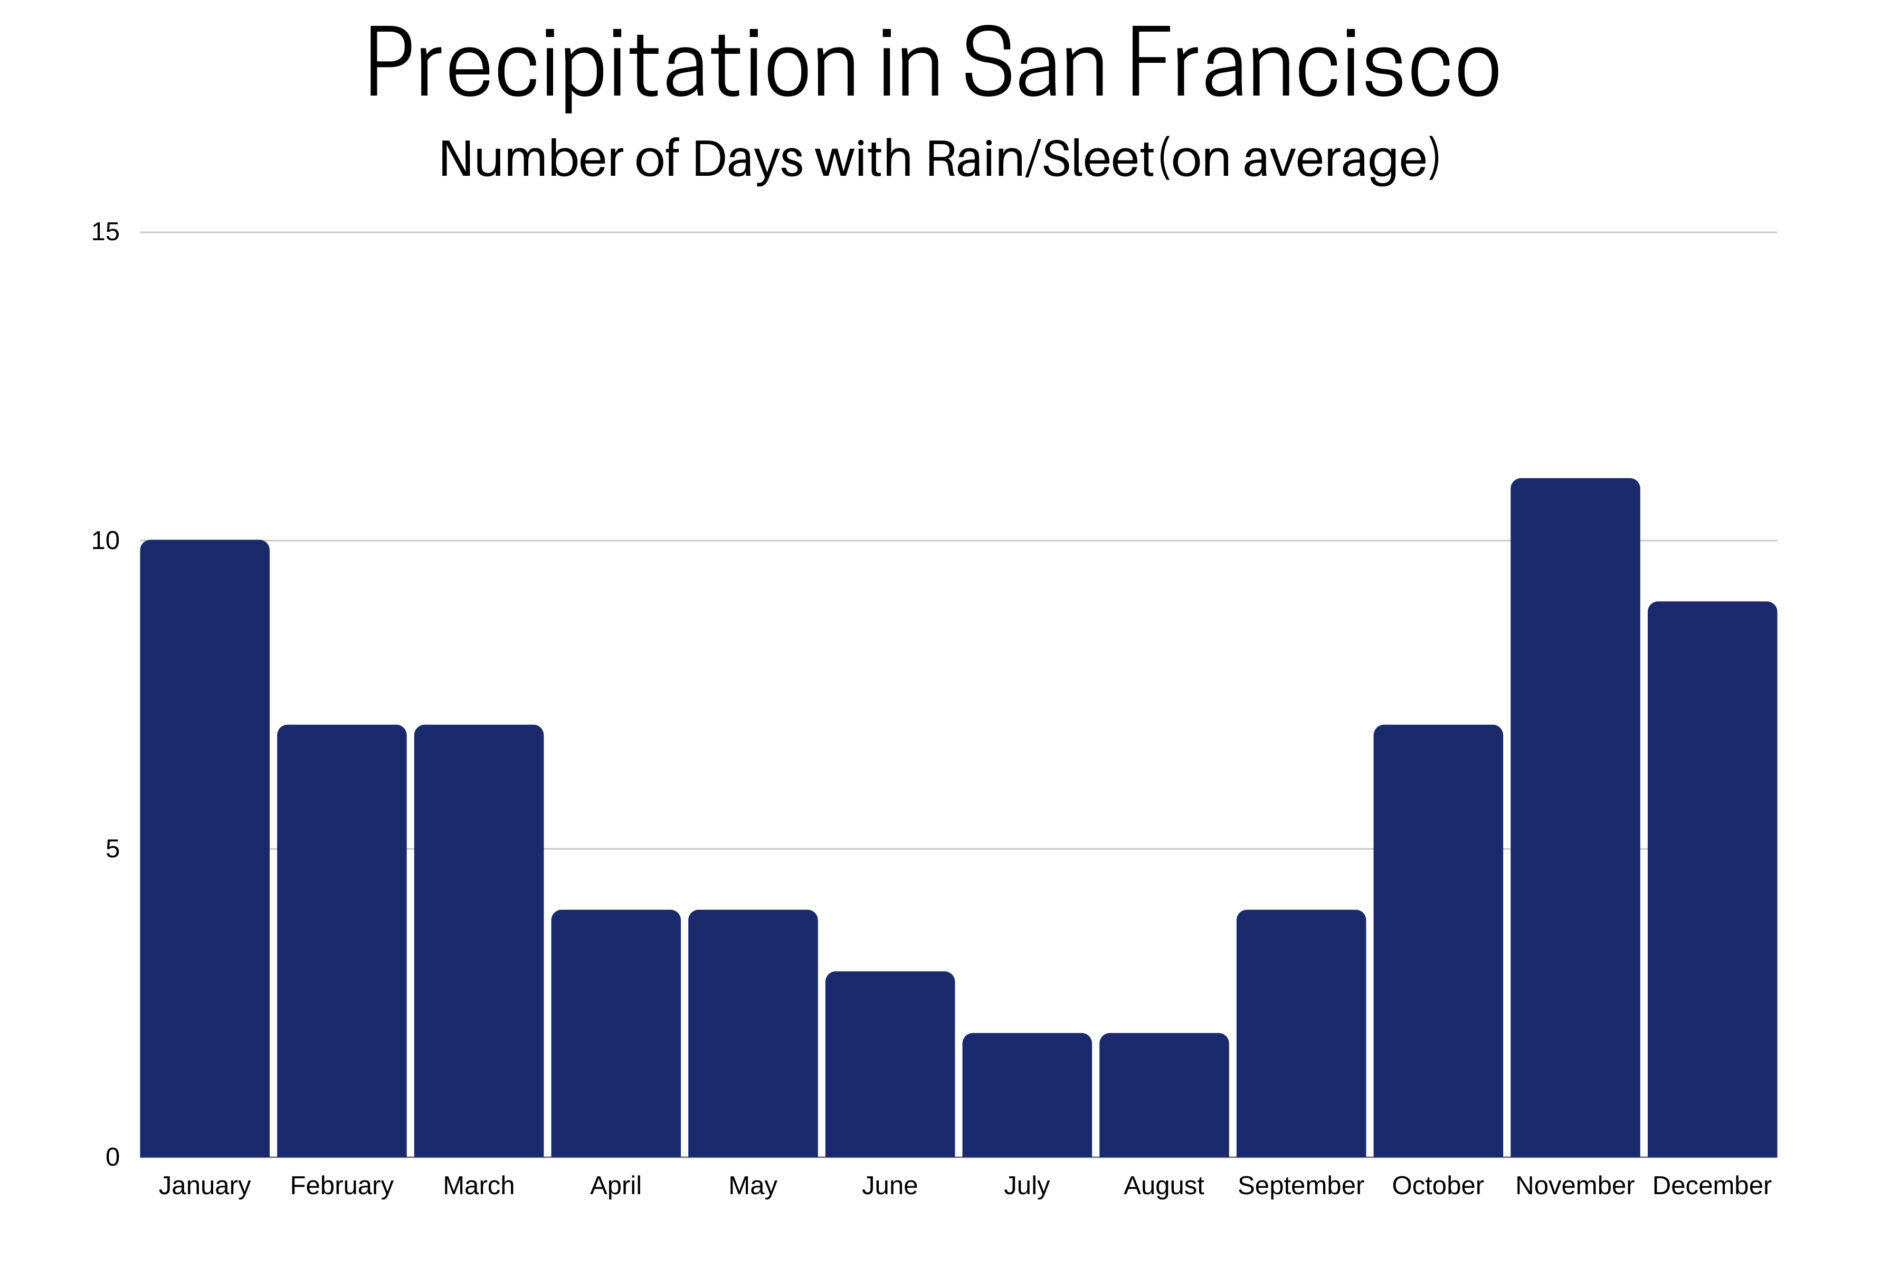 Precipitation chart showing the number of days with rain in San Francisco.